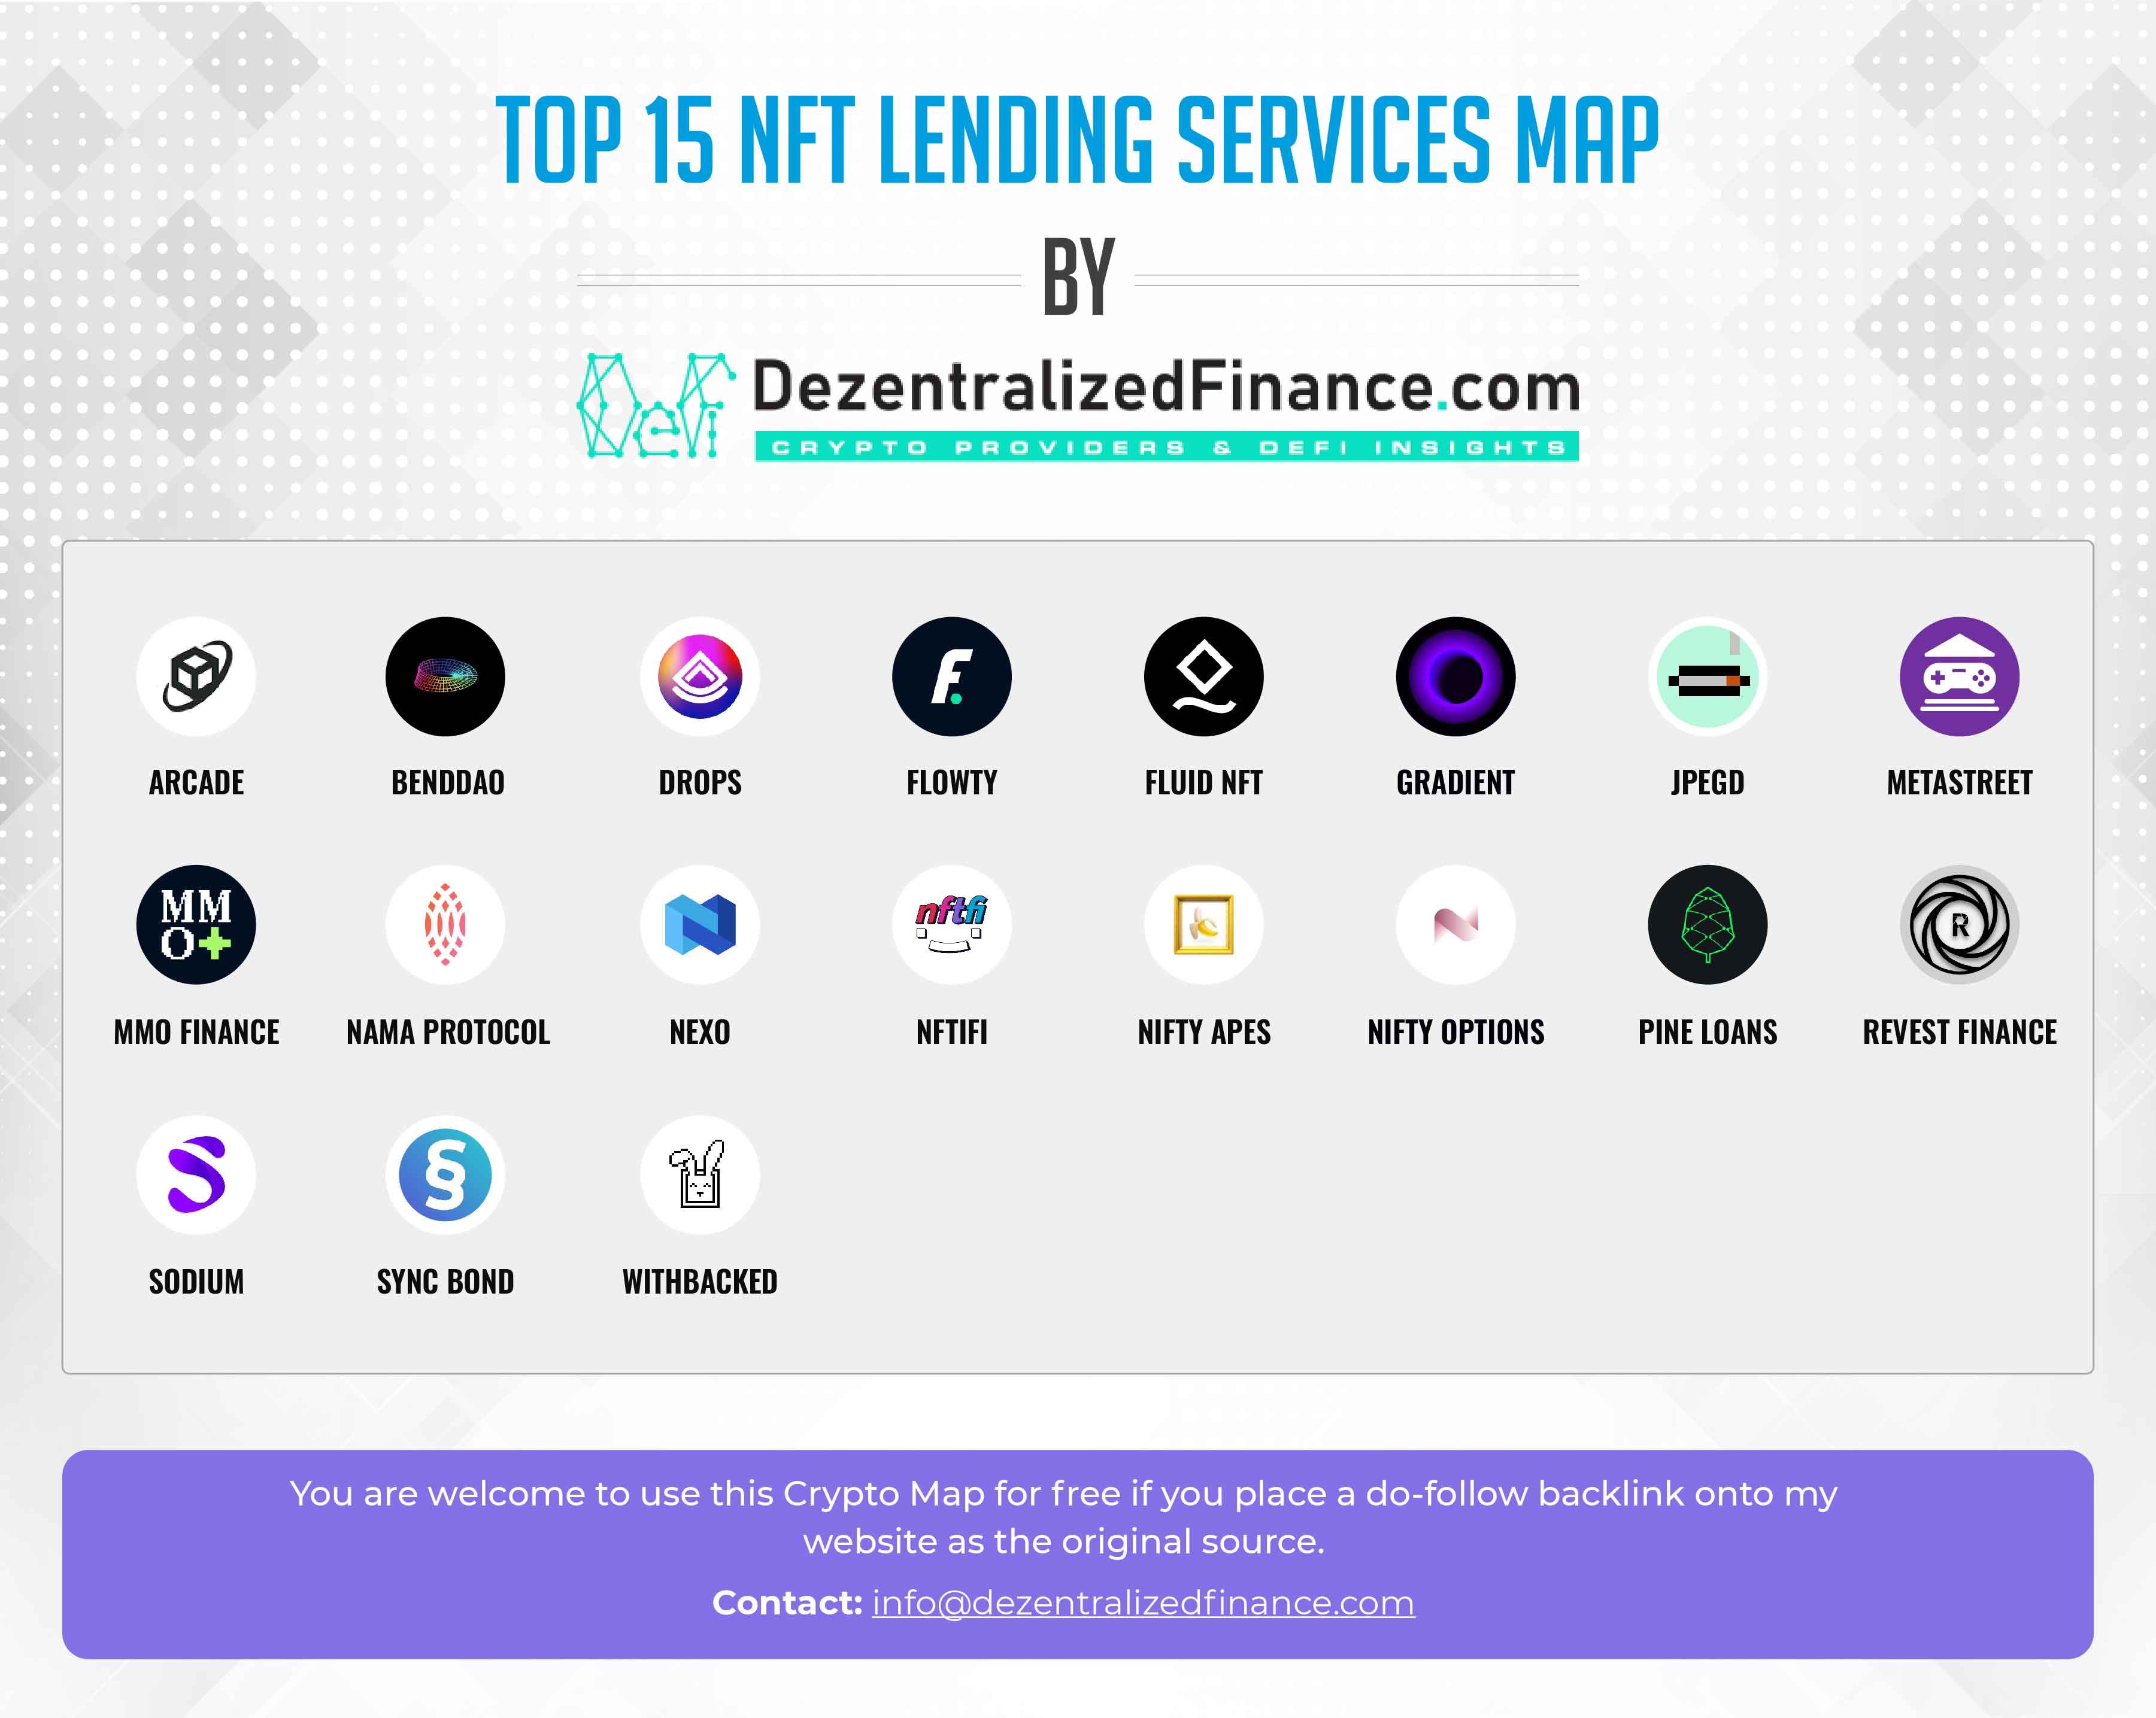 Top 15 NFT Lending Services scaled